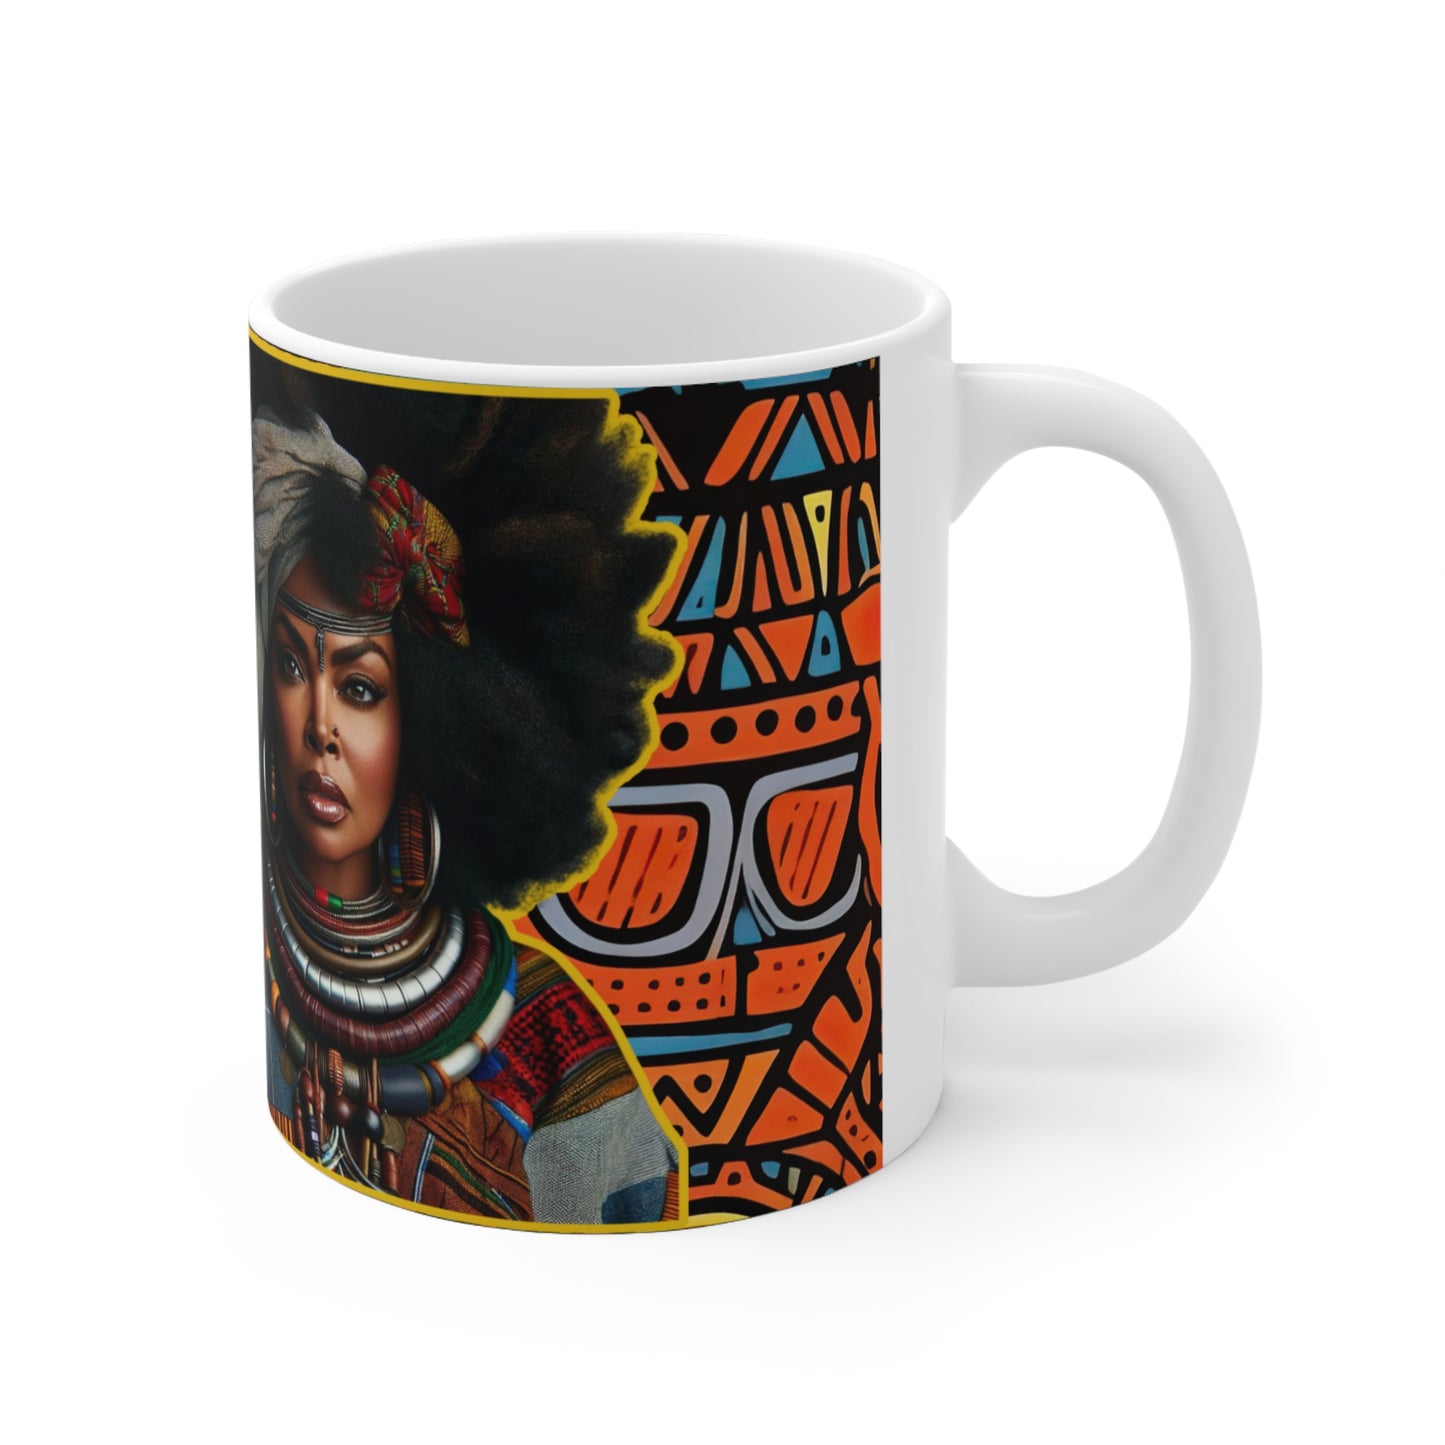 She is BRILLIANT: Inspirational African Queen Mug - Ceramic Coffee Cups, 11oz, 15oz